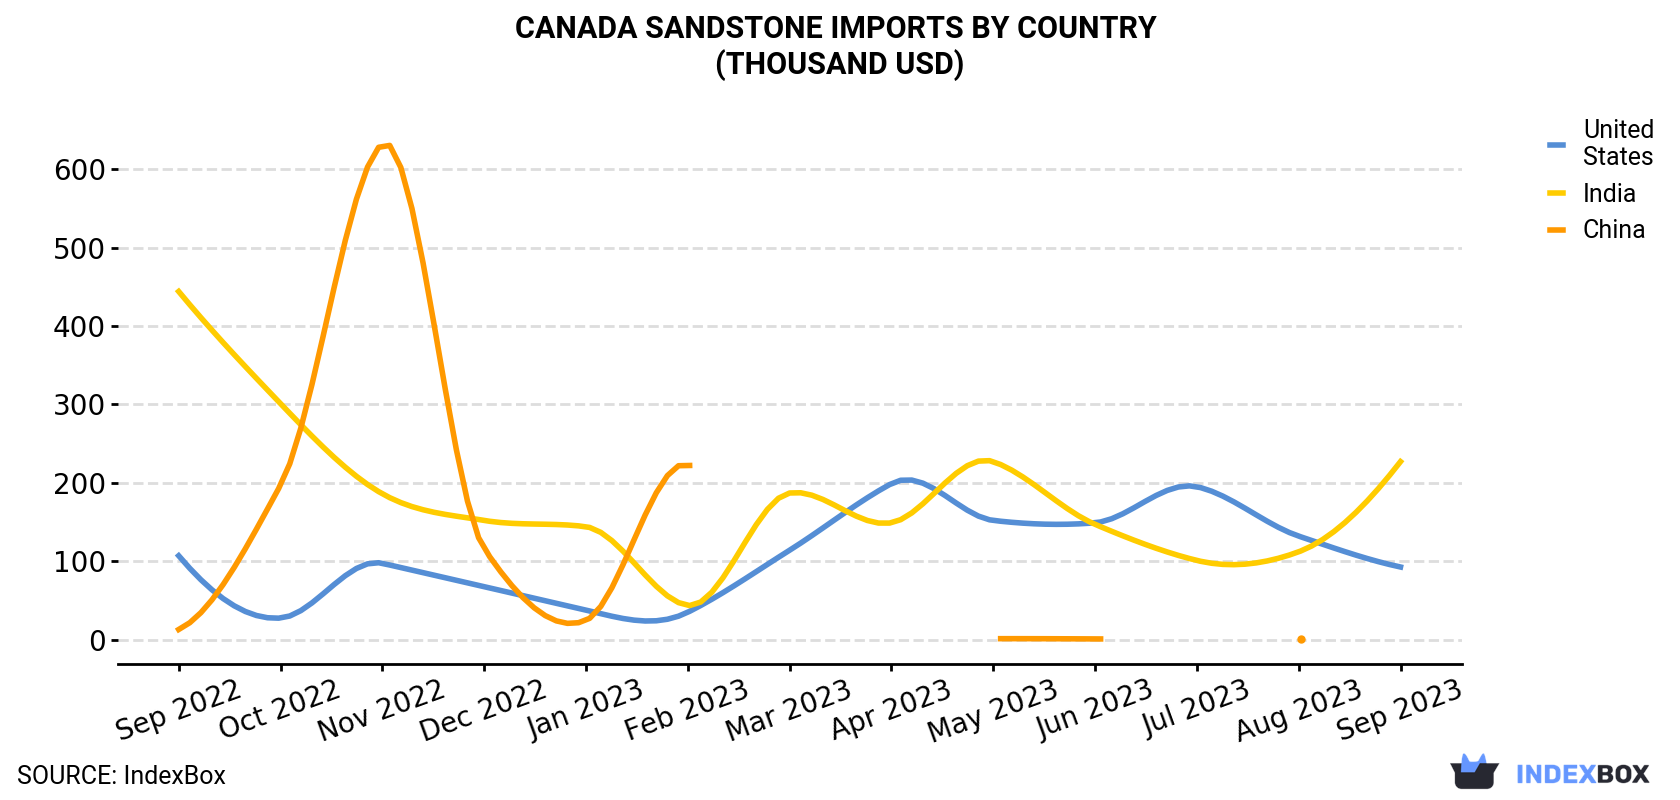 Canada Sandstone Imports By Country (Thousand USD)